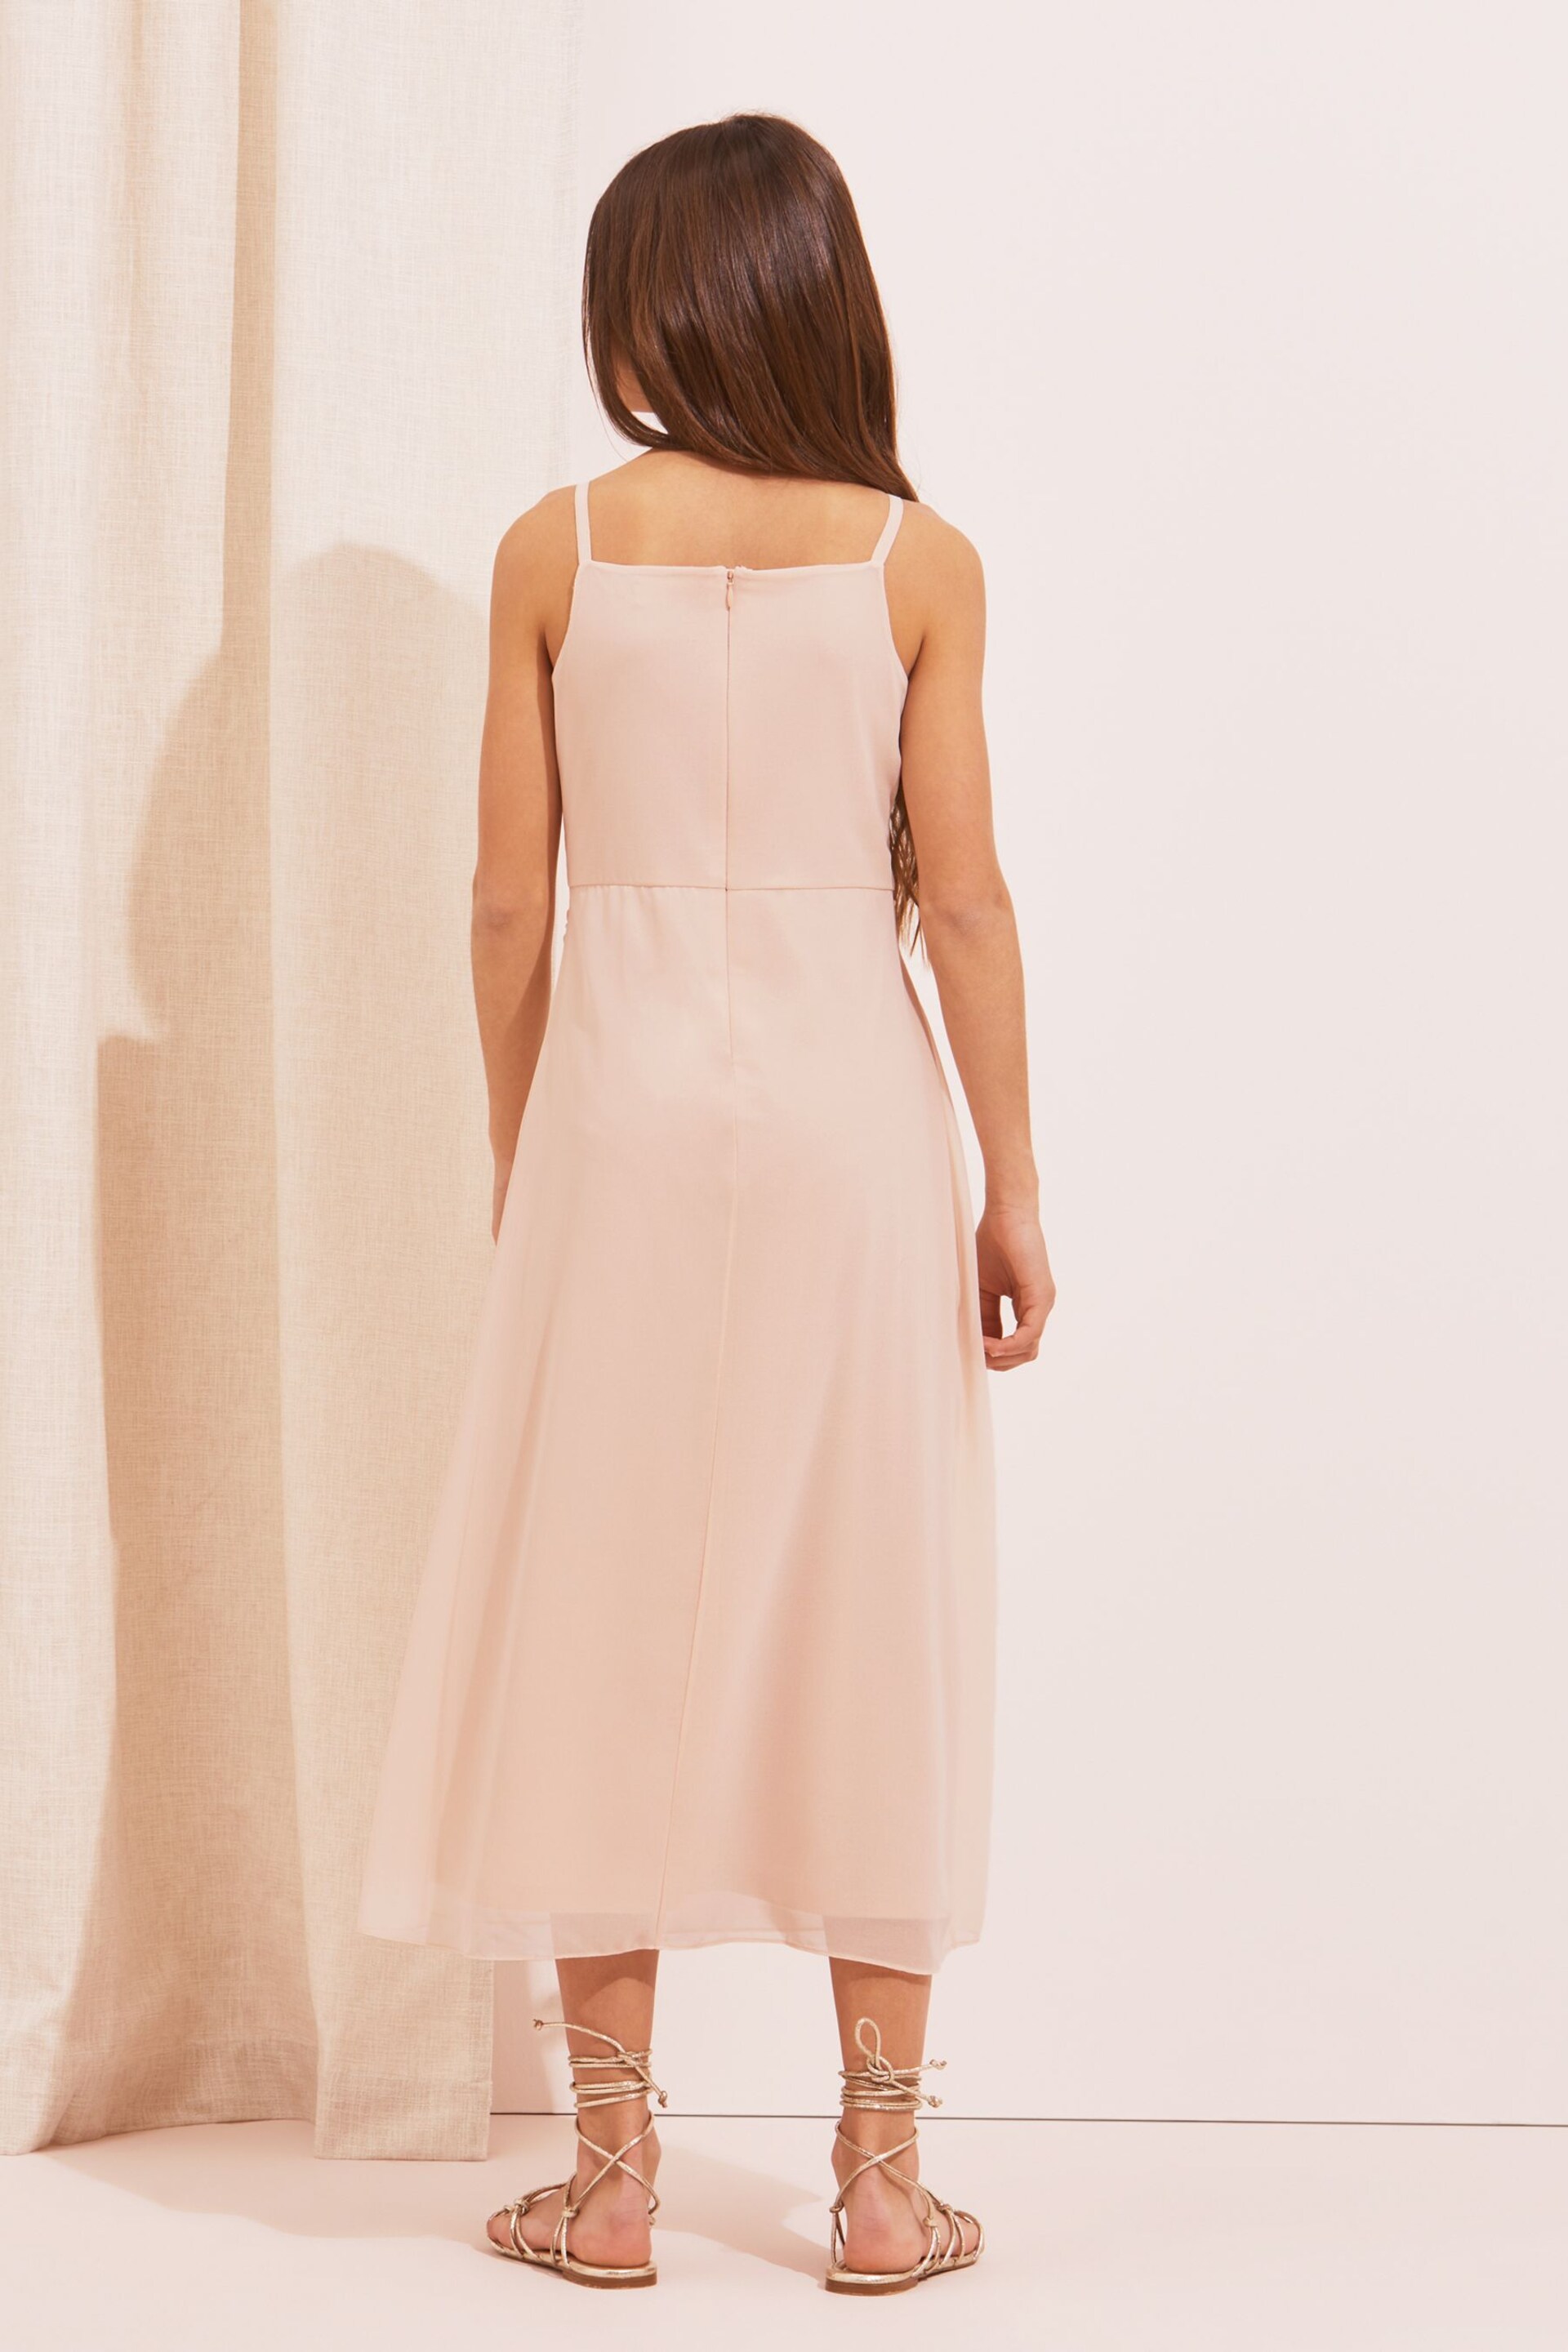 Lipsy Pink Embellished Strap Maxi Occasion Dress - Image 3 of 4